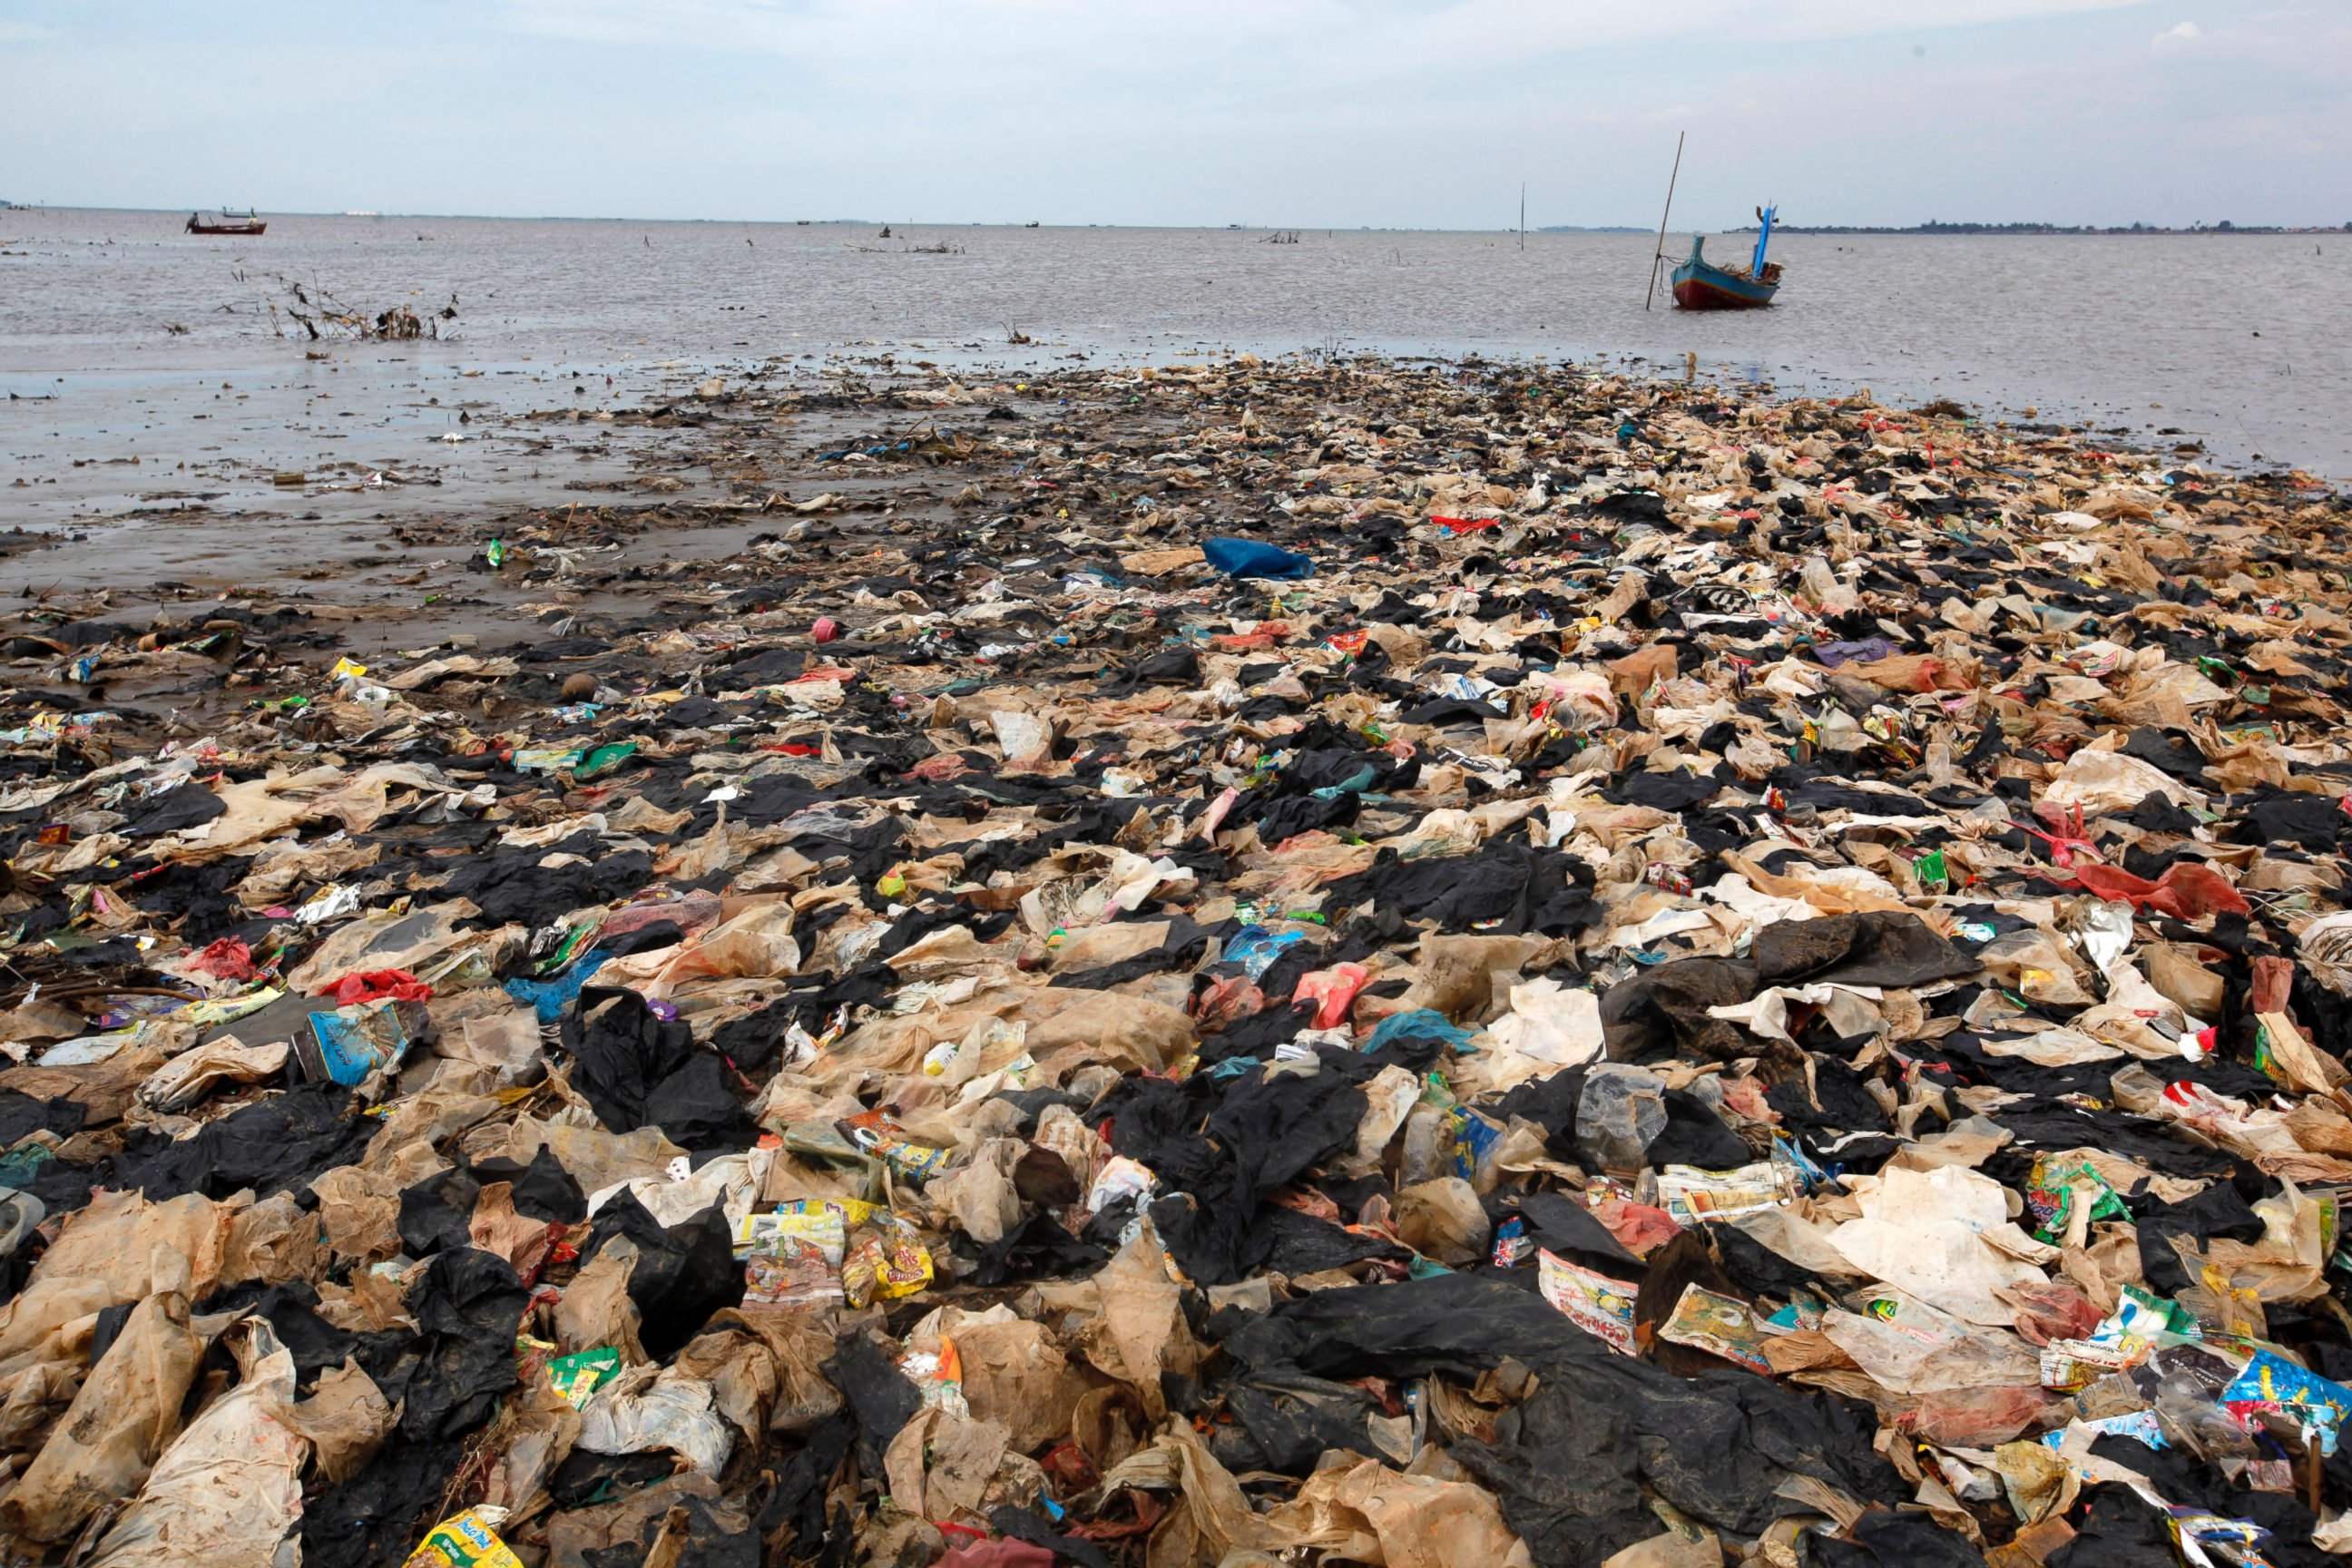 PHOTO: A small island formed by the accumulation of trash is pictured in Tanjung Burung, on the coast of Indonesia's Banten province June 5, 2013.